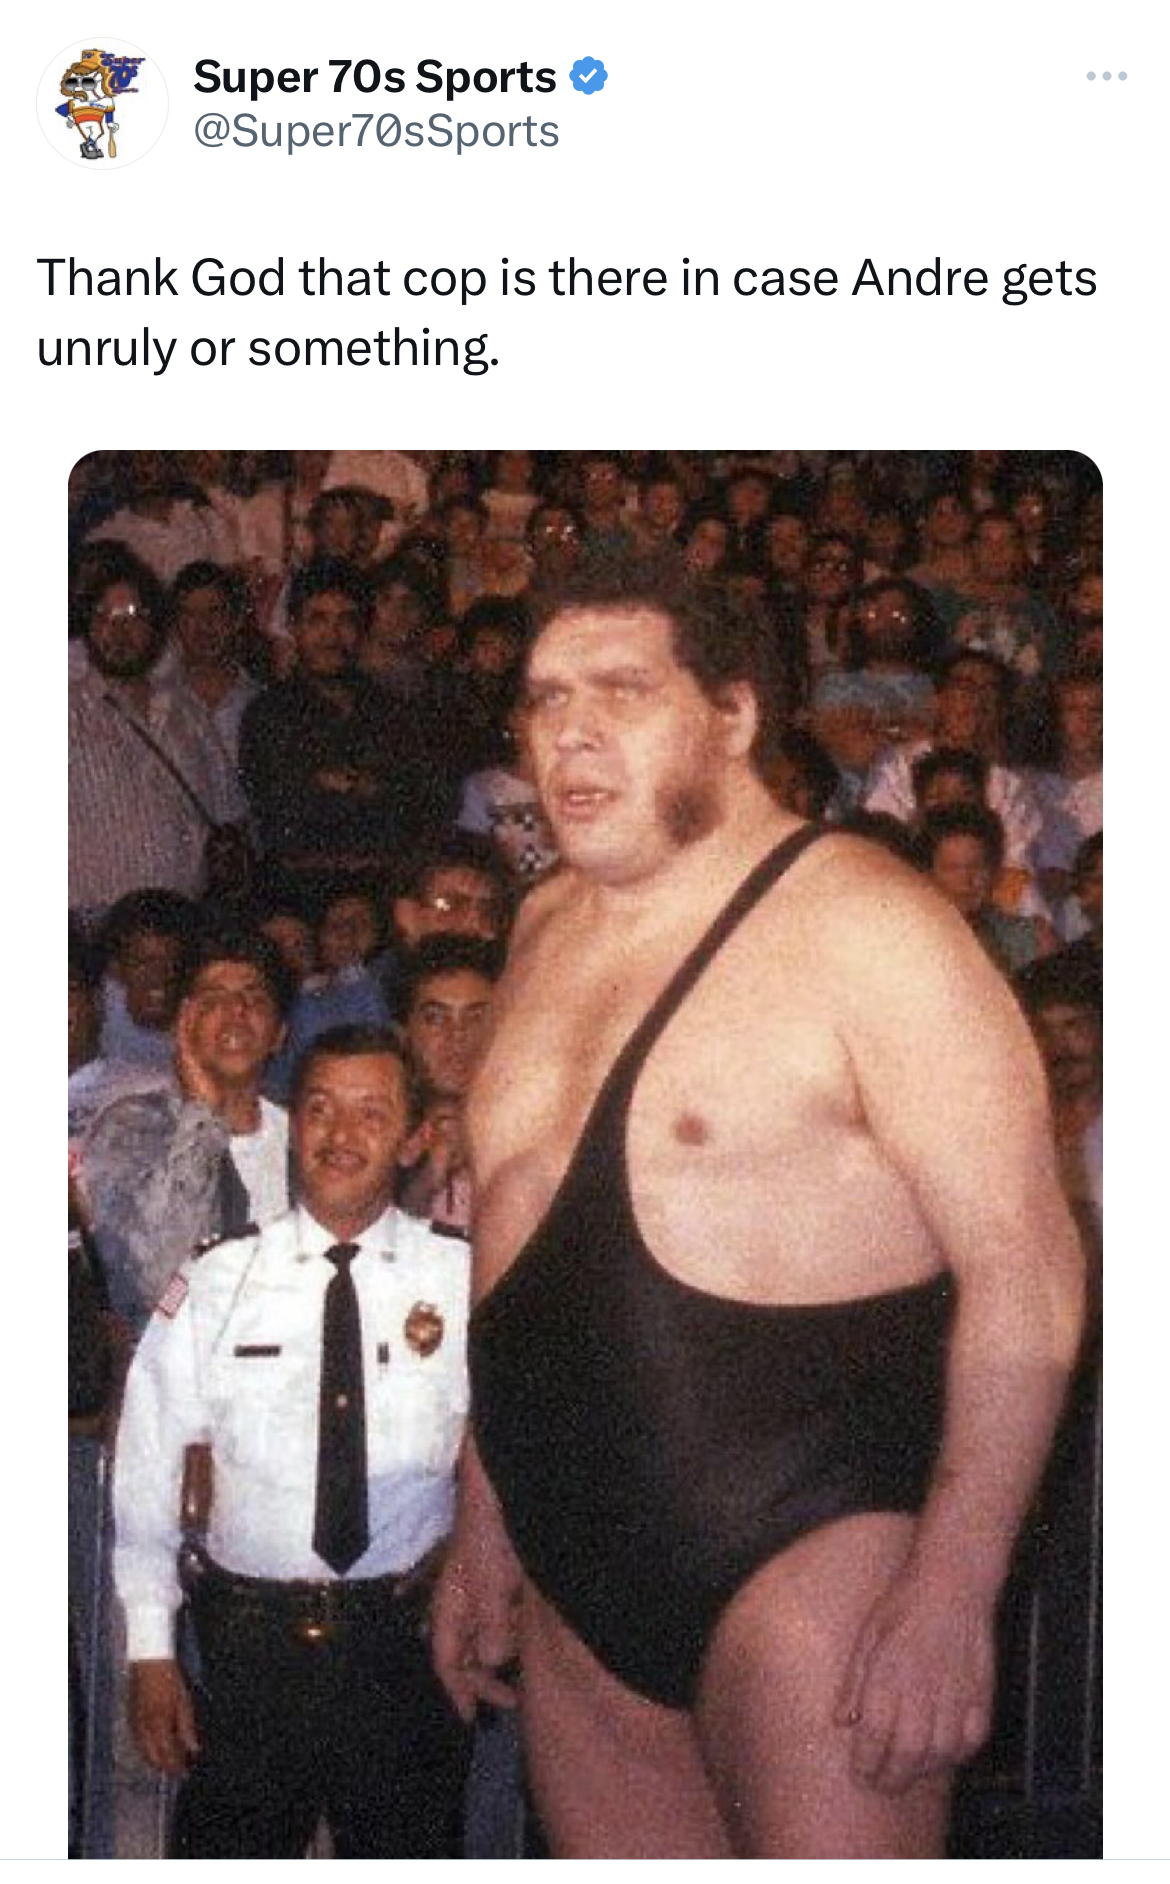 savage tweets andre the giant - Super 70s Sports www. Thank God that cop is there in case Andre gets unruly or something.